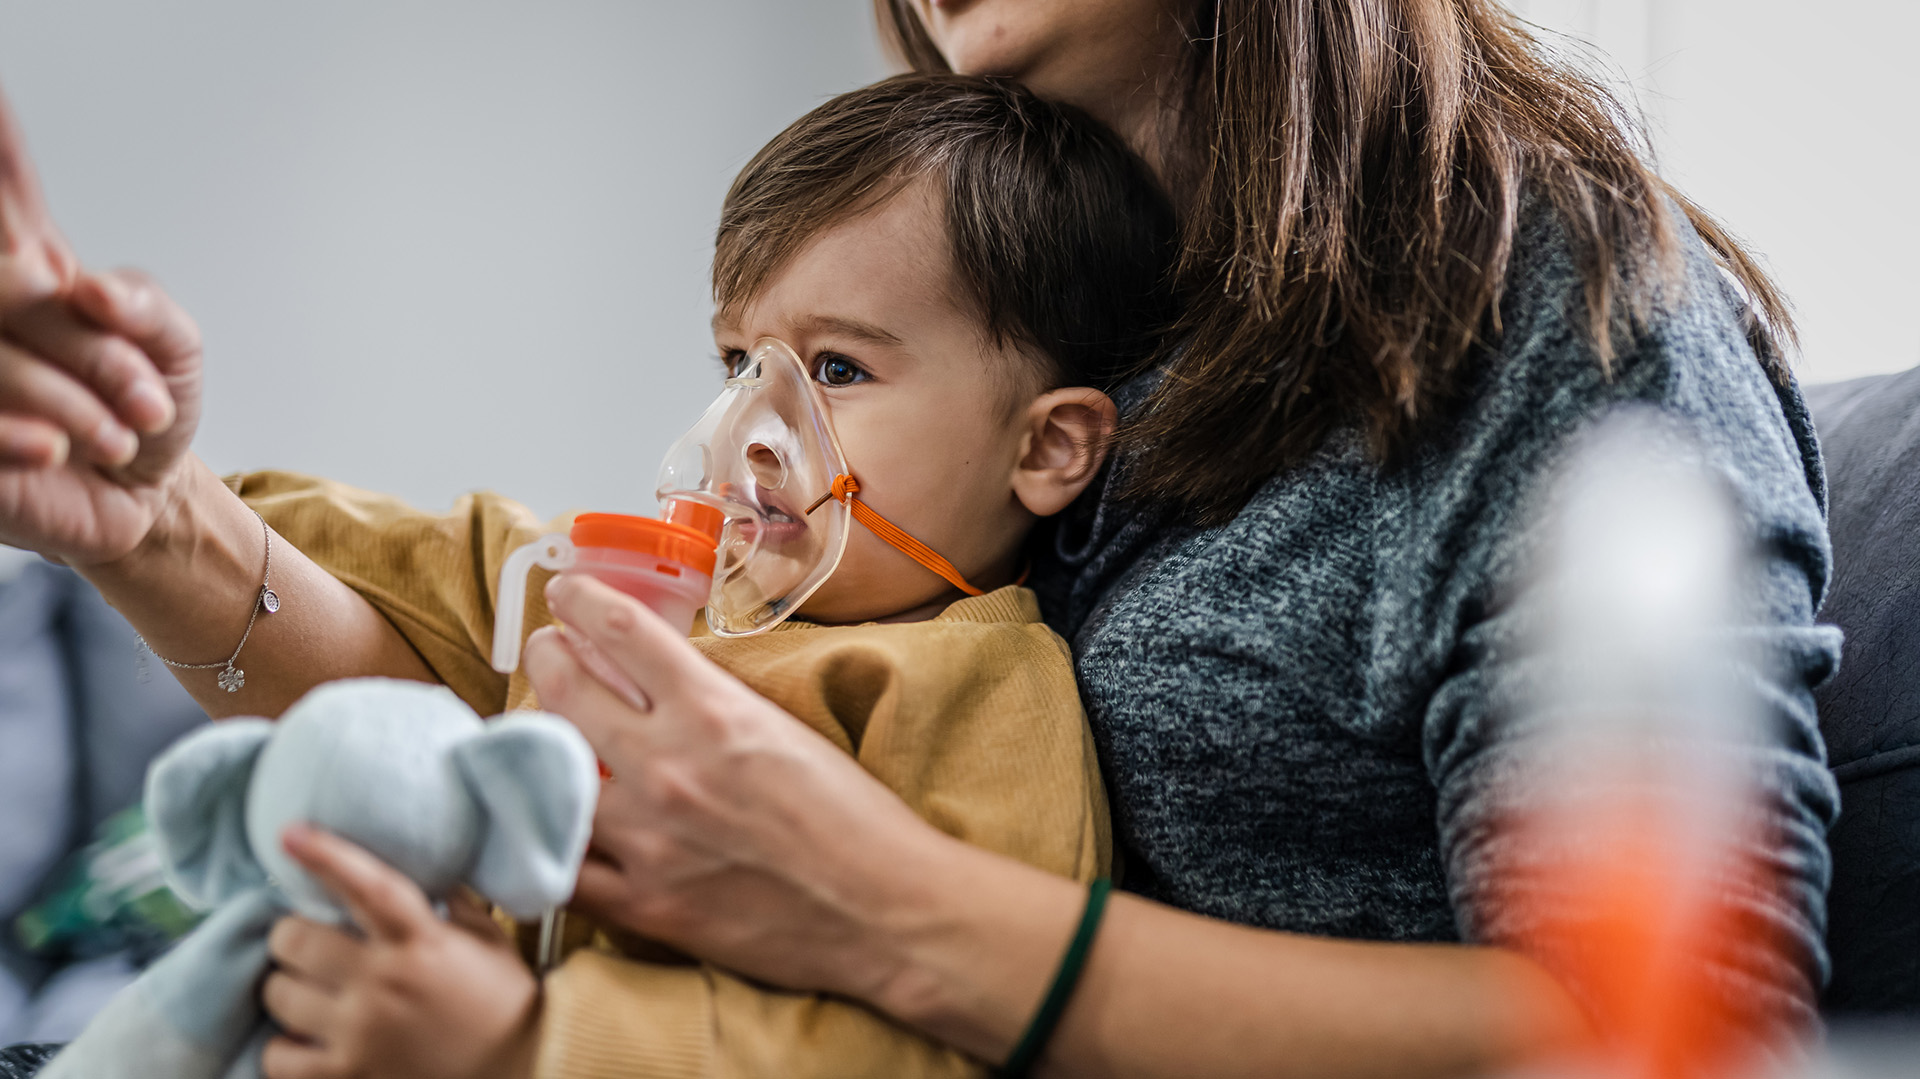 Bronchiolitis is an acute respiratory infection that occurs most frequently in the autumn-winter months and mainly affects children under 1 year of age (Getty Images)